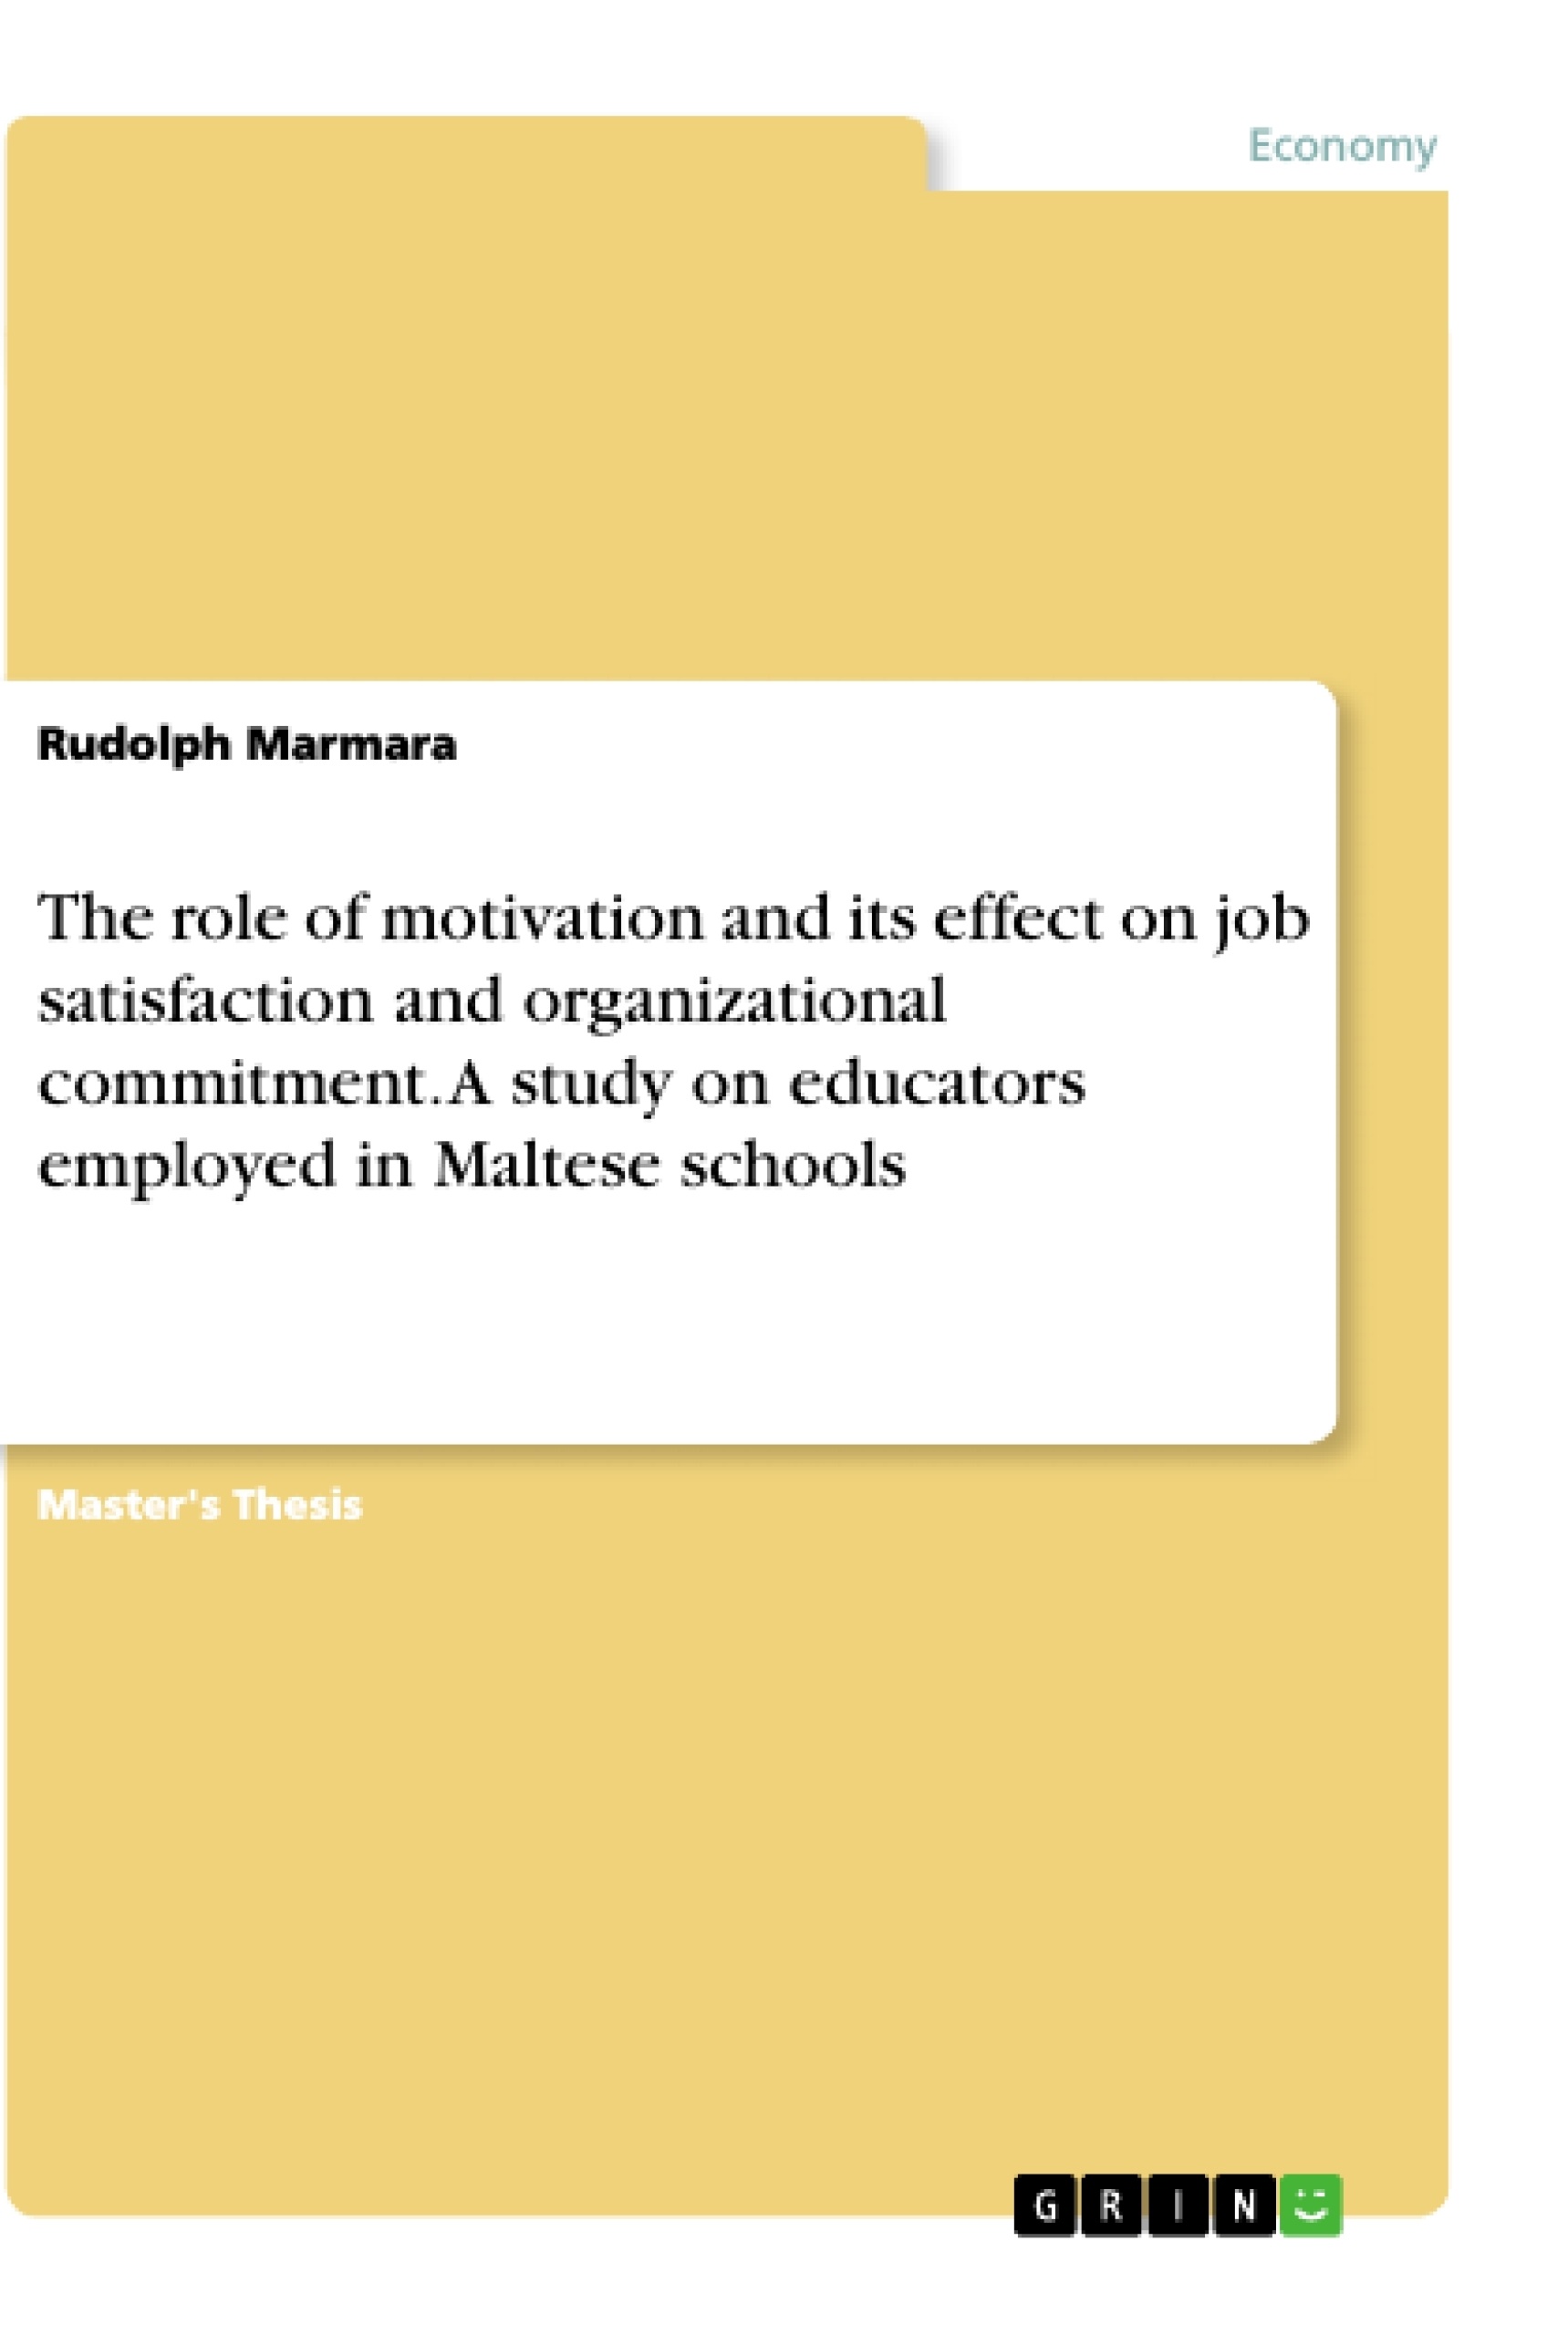 Title: The role of motivation and its effect on job satisfaction and organizational commitment. A study on educators employed in Maltese schools